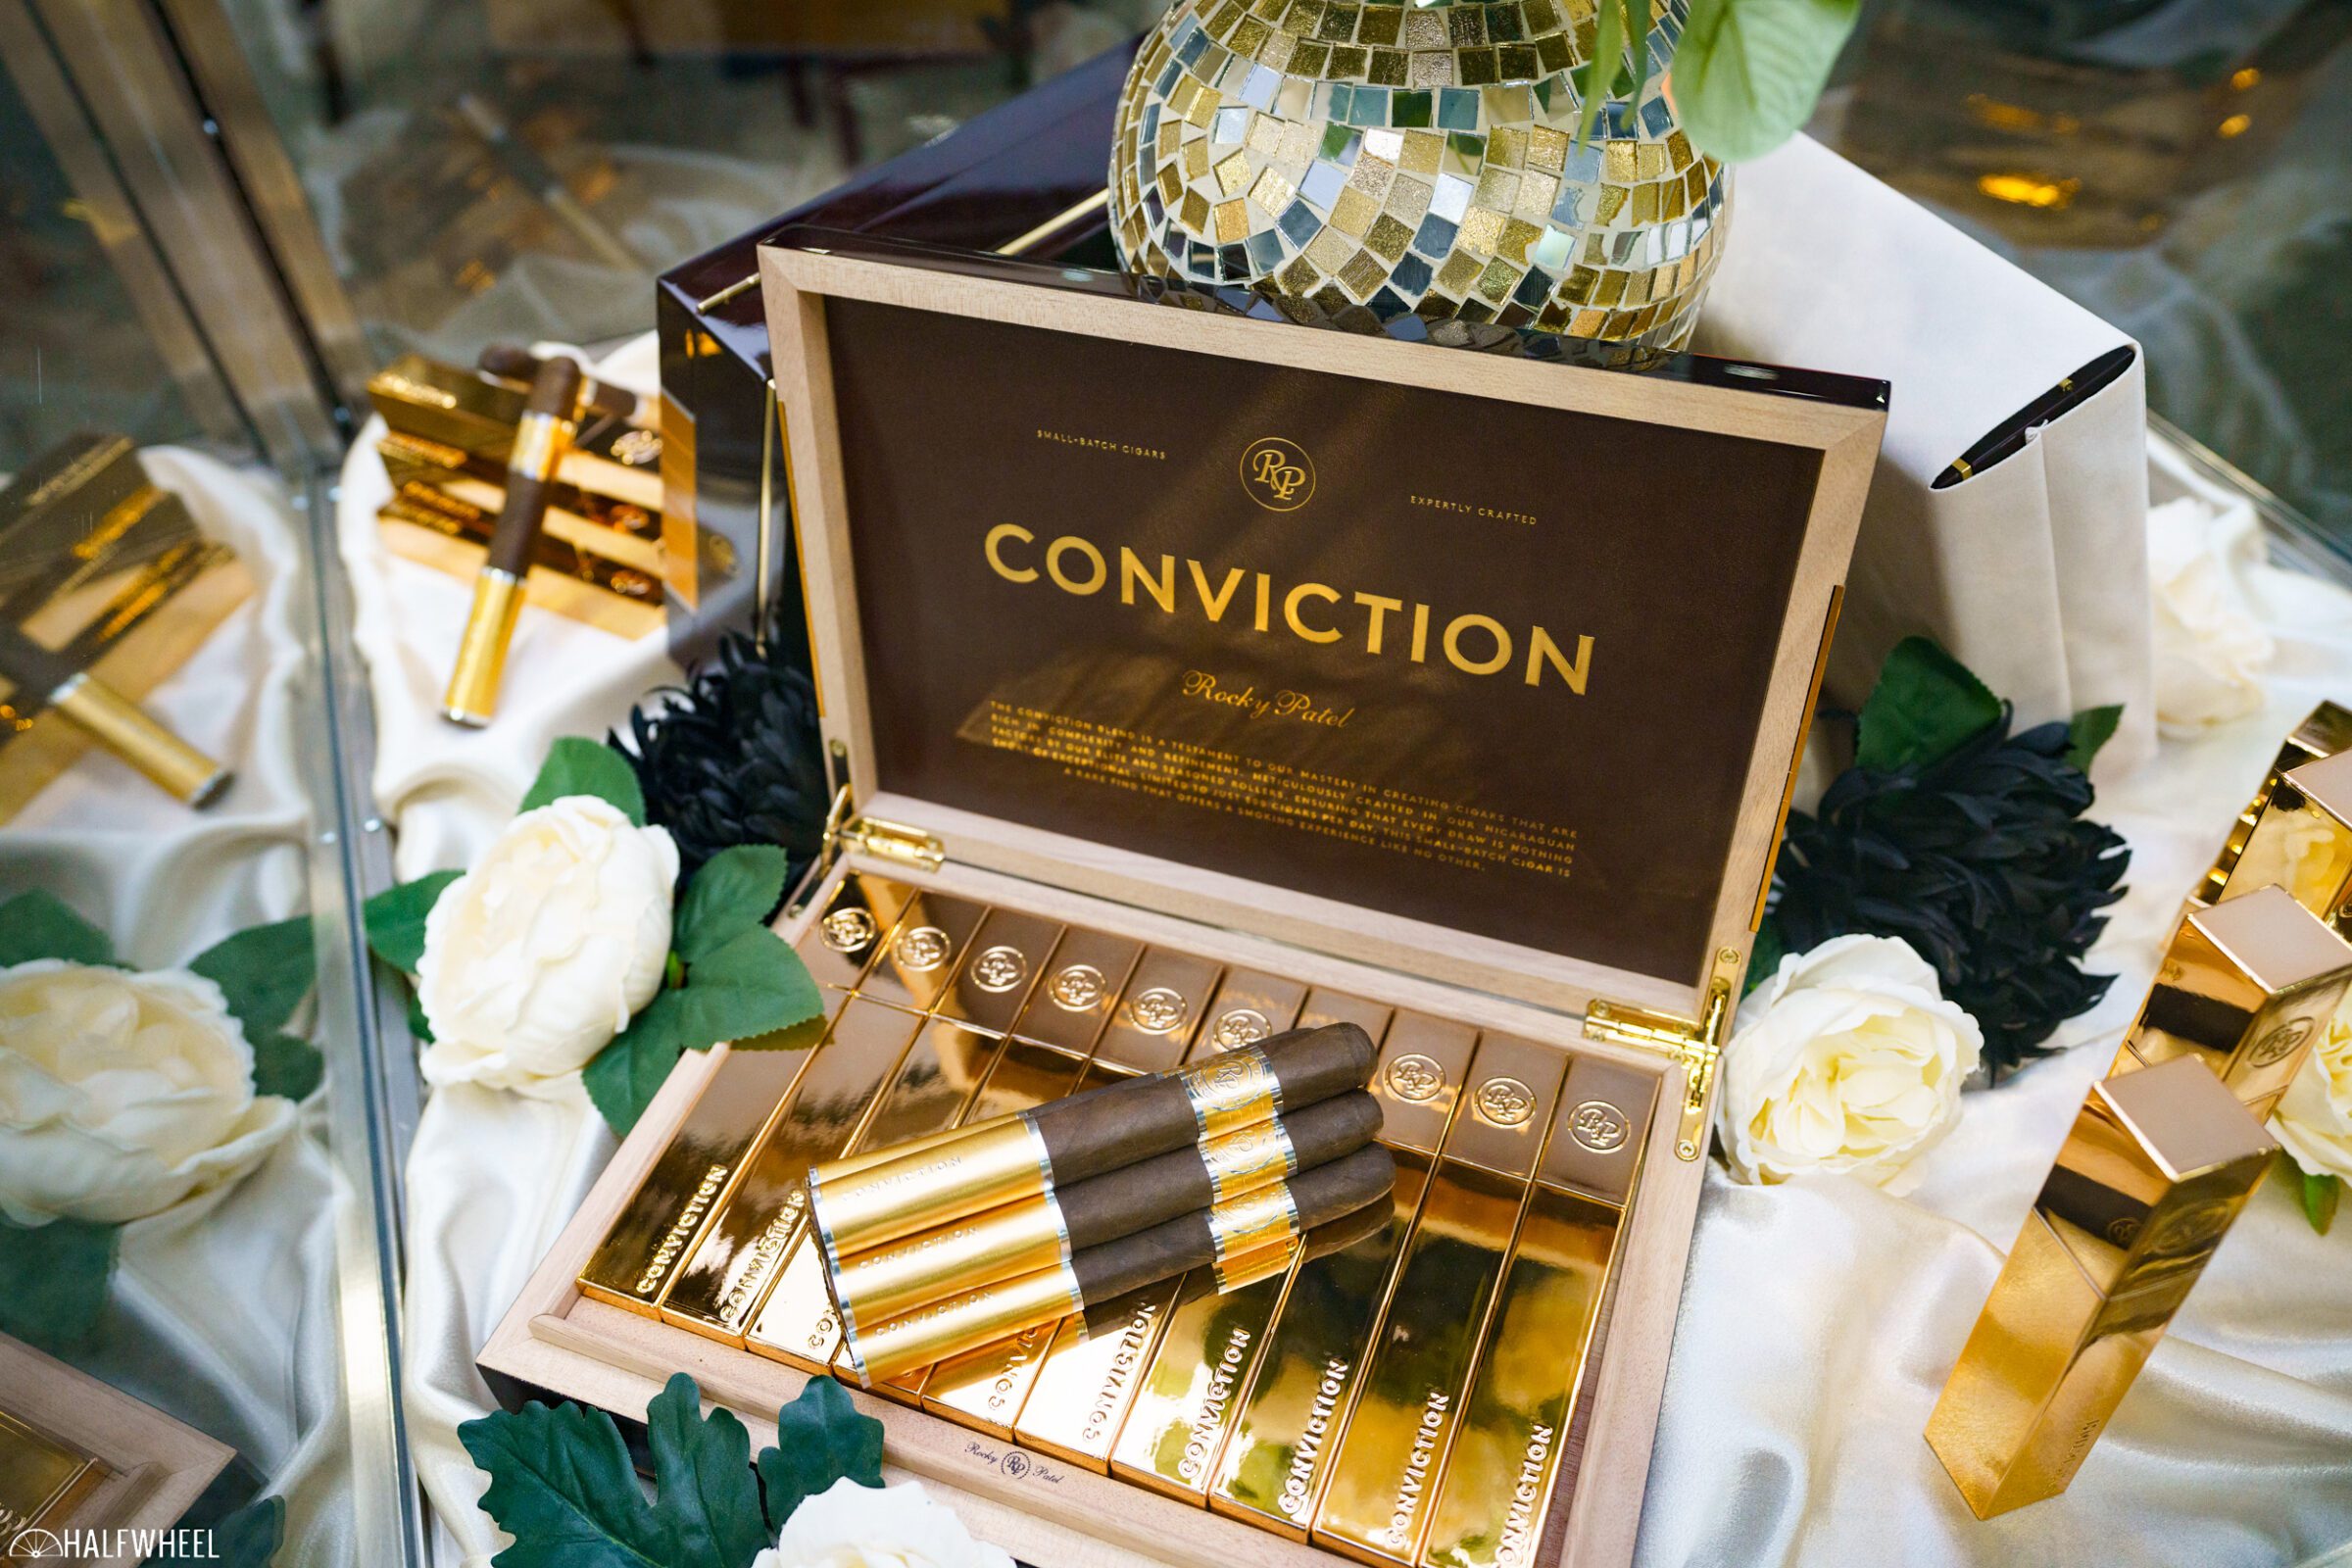 rocky-patel-conviction,-a-$100-cigar,-heads-to-stores